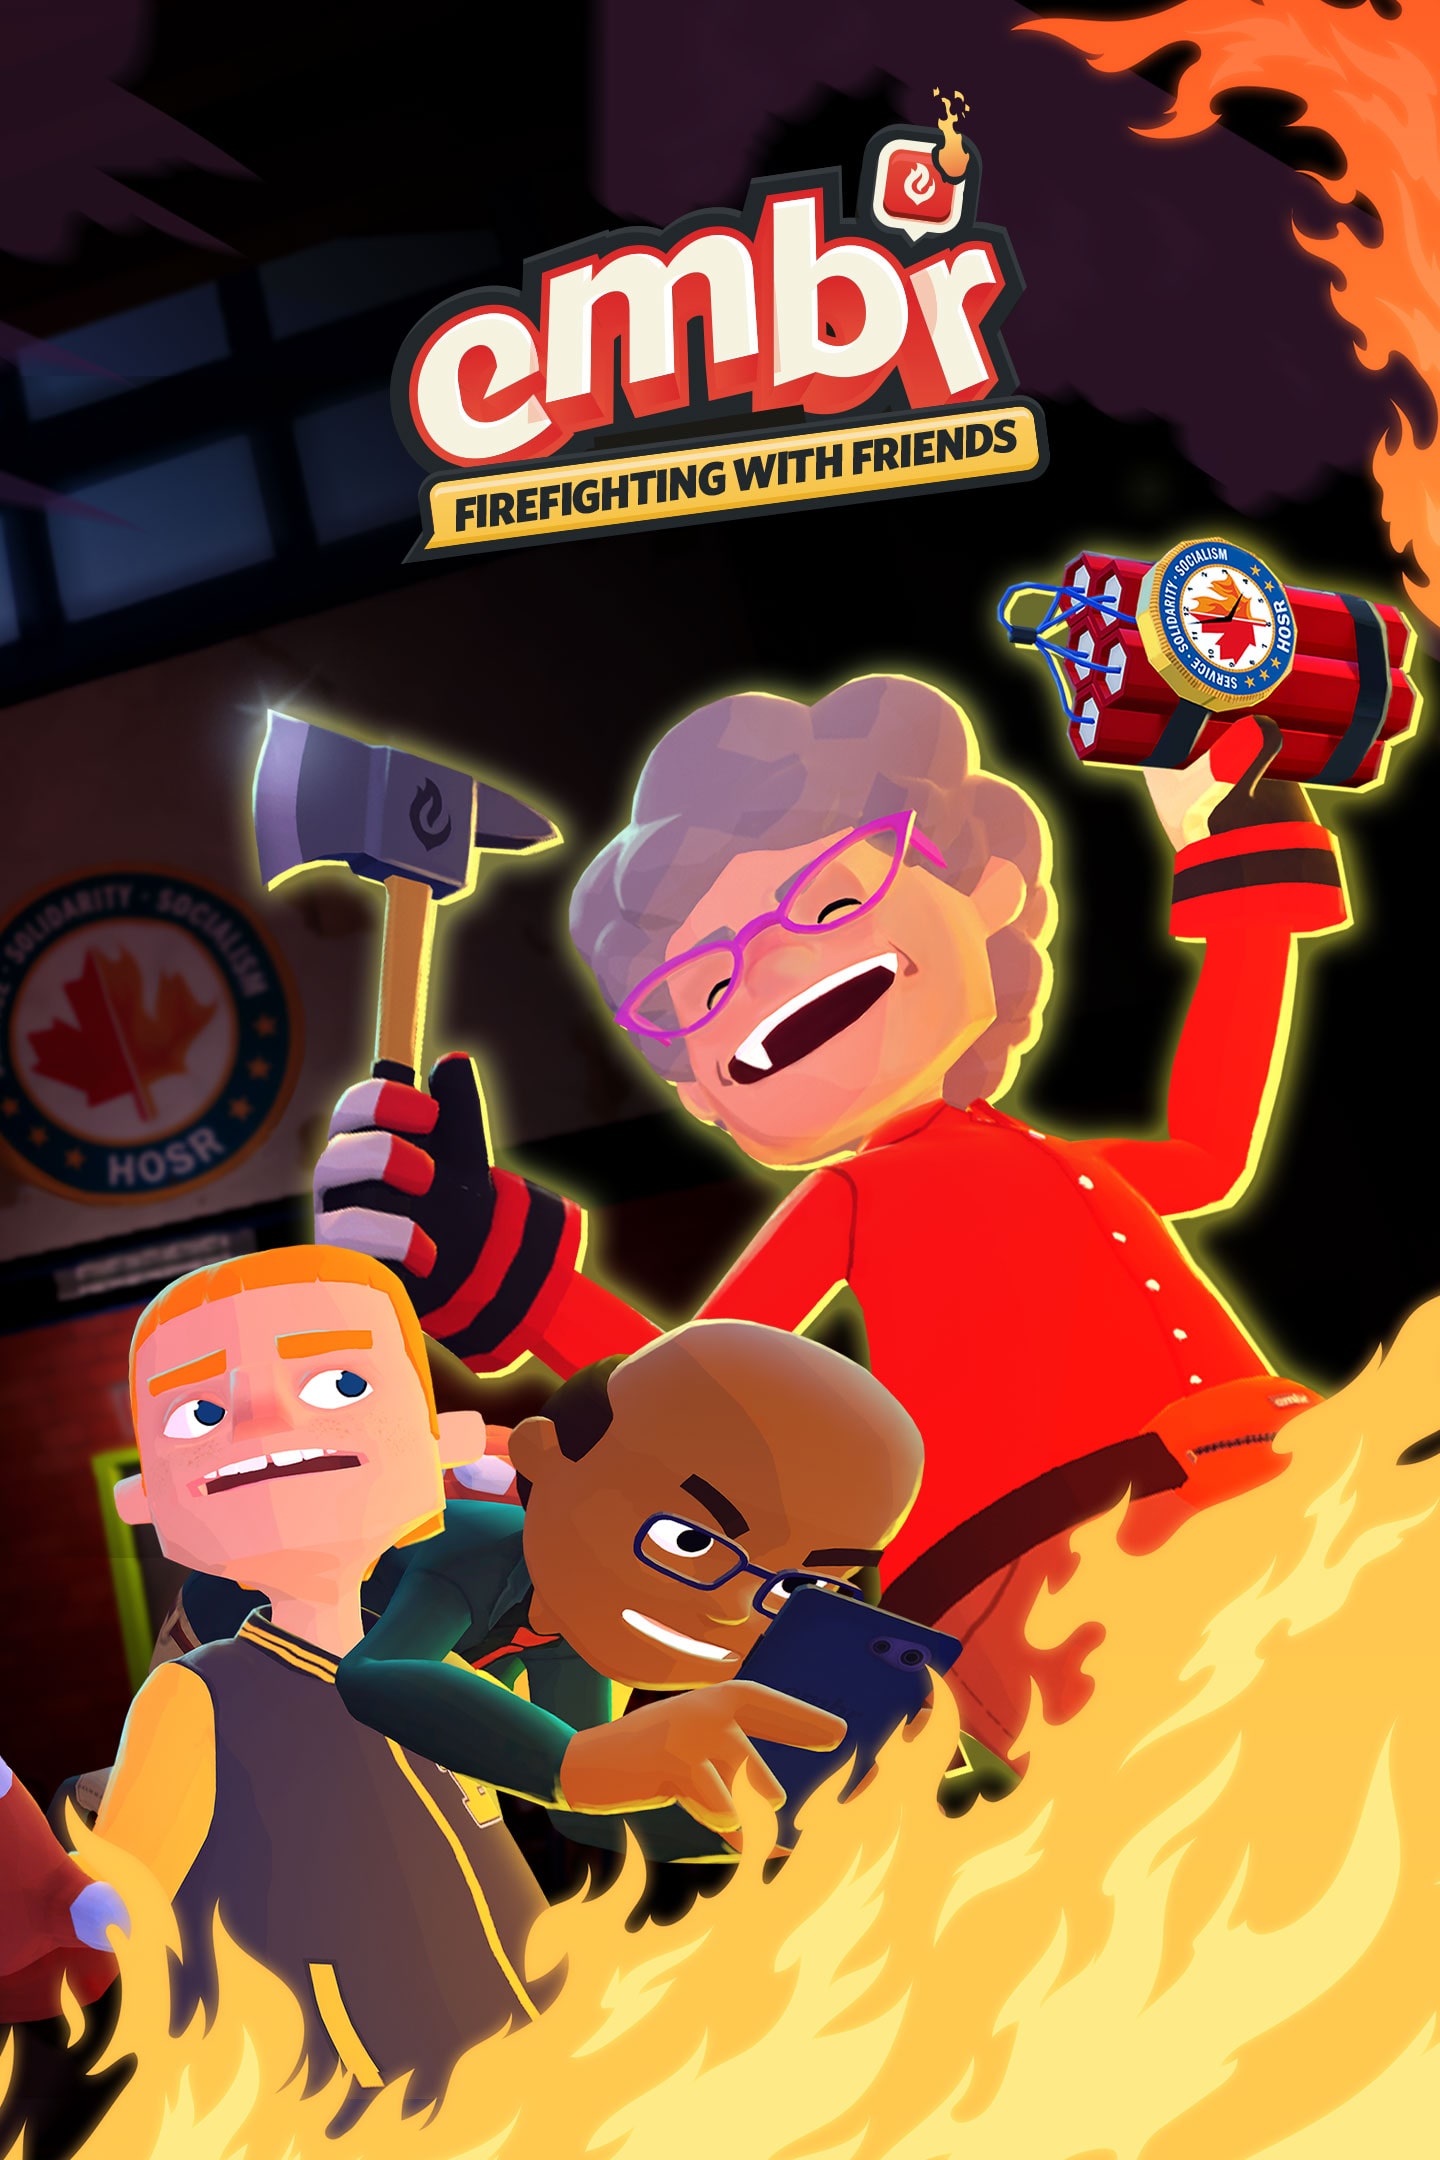 Play firefighters for hire in frantic multiplayer Embr, out tomorrow –  PlayStation.Blog